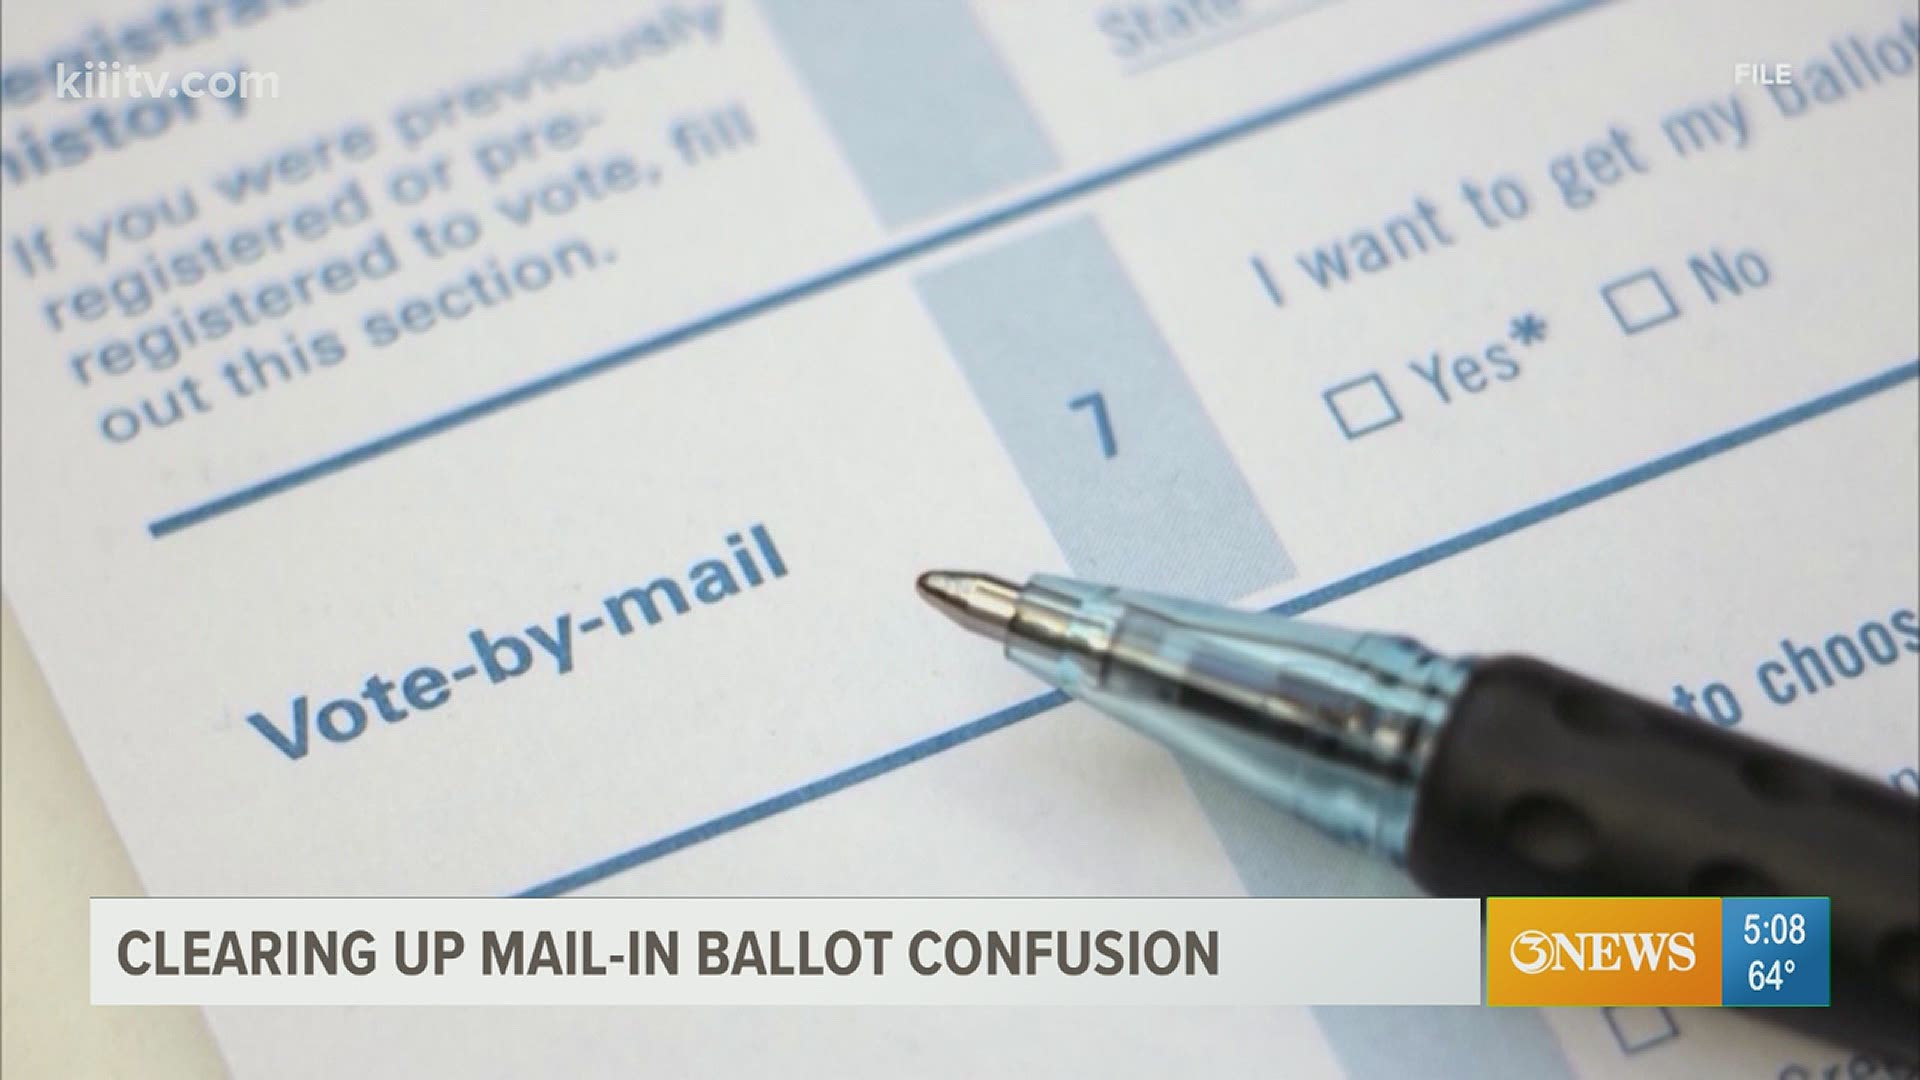 Once you're ready to turn in your ballot, you have two options. Those options are to drop it in the mail, or hand delivering the ballot to the county clerk's office.